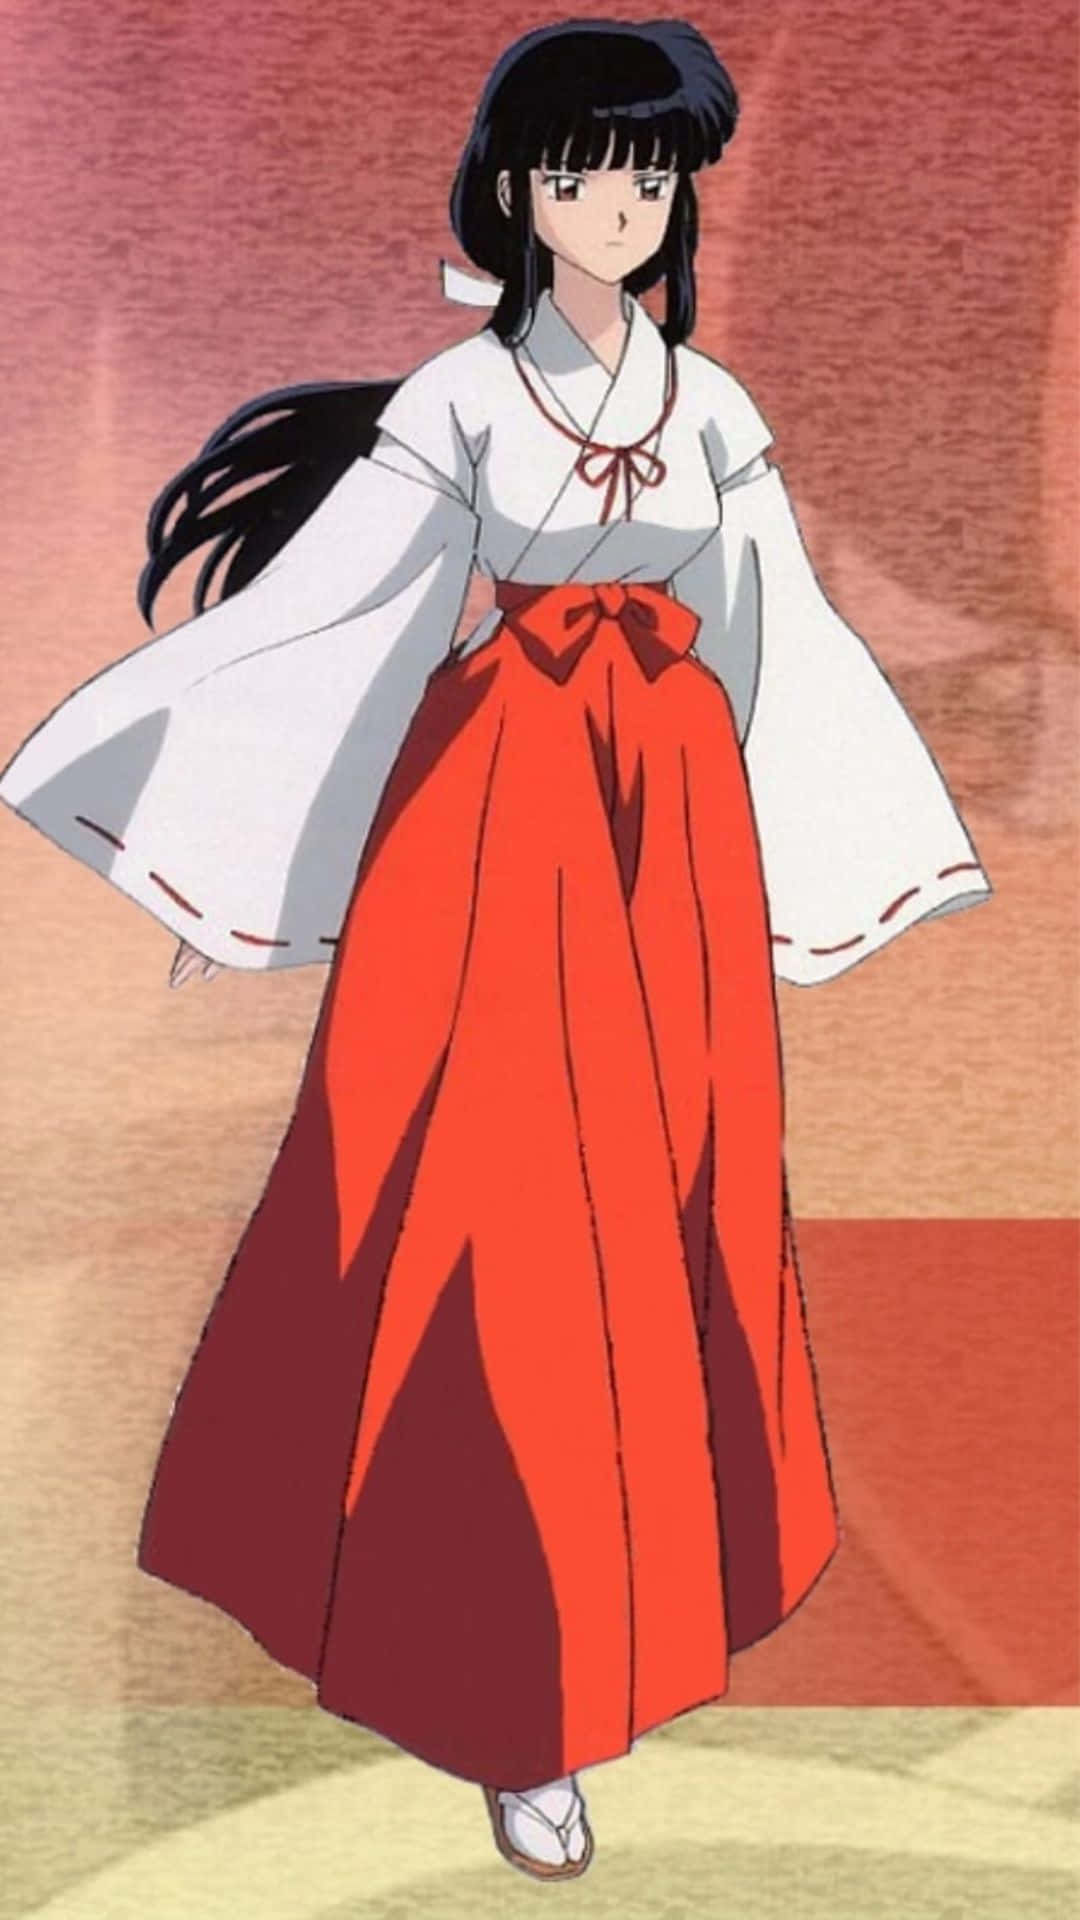 Kikyo, the beautiful and powerful shrine maiden from the anime InuYasha against a calming scenery backdrop Wallpaper